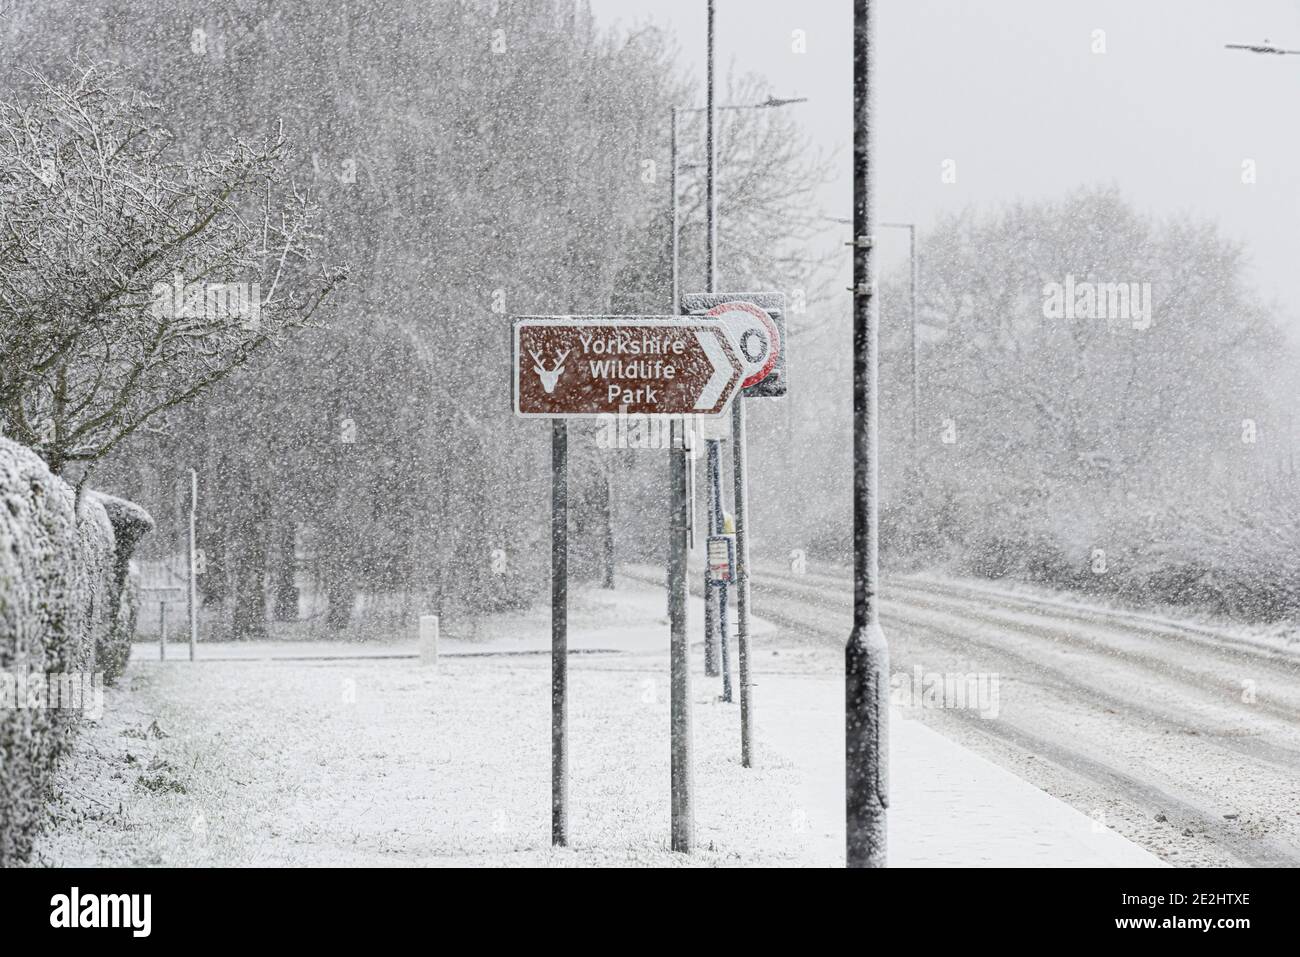 UK Weather: Doncaster, South Yorkshire - 14 January 2021 - Early Morning Snow hits Yorkshire Wildlife Park, Doncaster, South Yorkshire. Credit: Michael Jamison/Alamy Live News Stock Photo